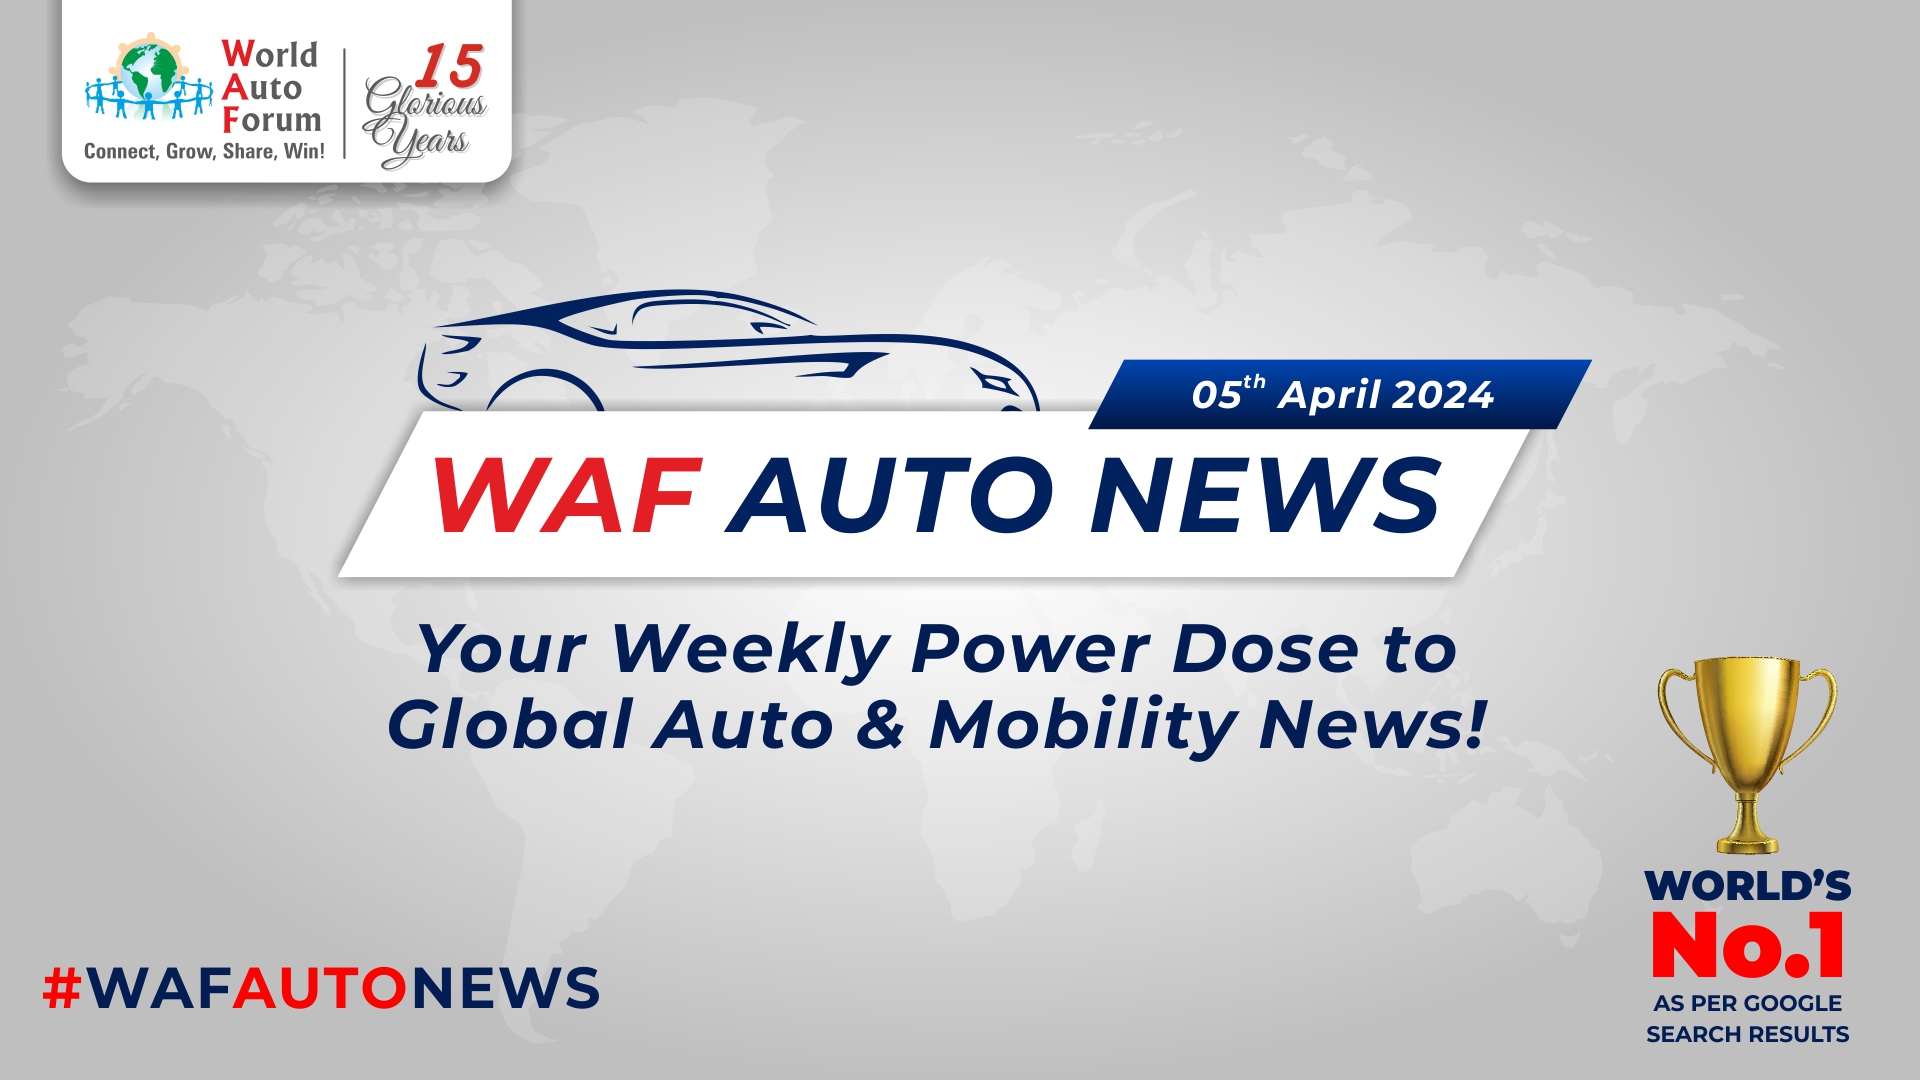 WAF Auto News | The Auto World This Week (5th April 2024) | World Auto Forum